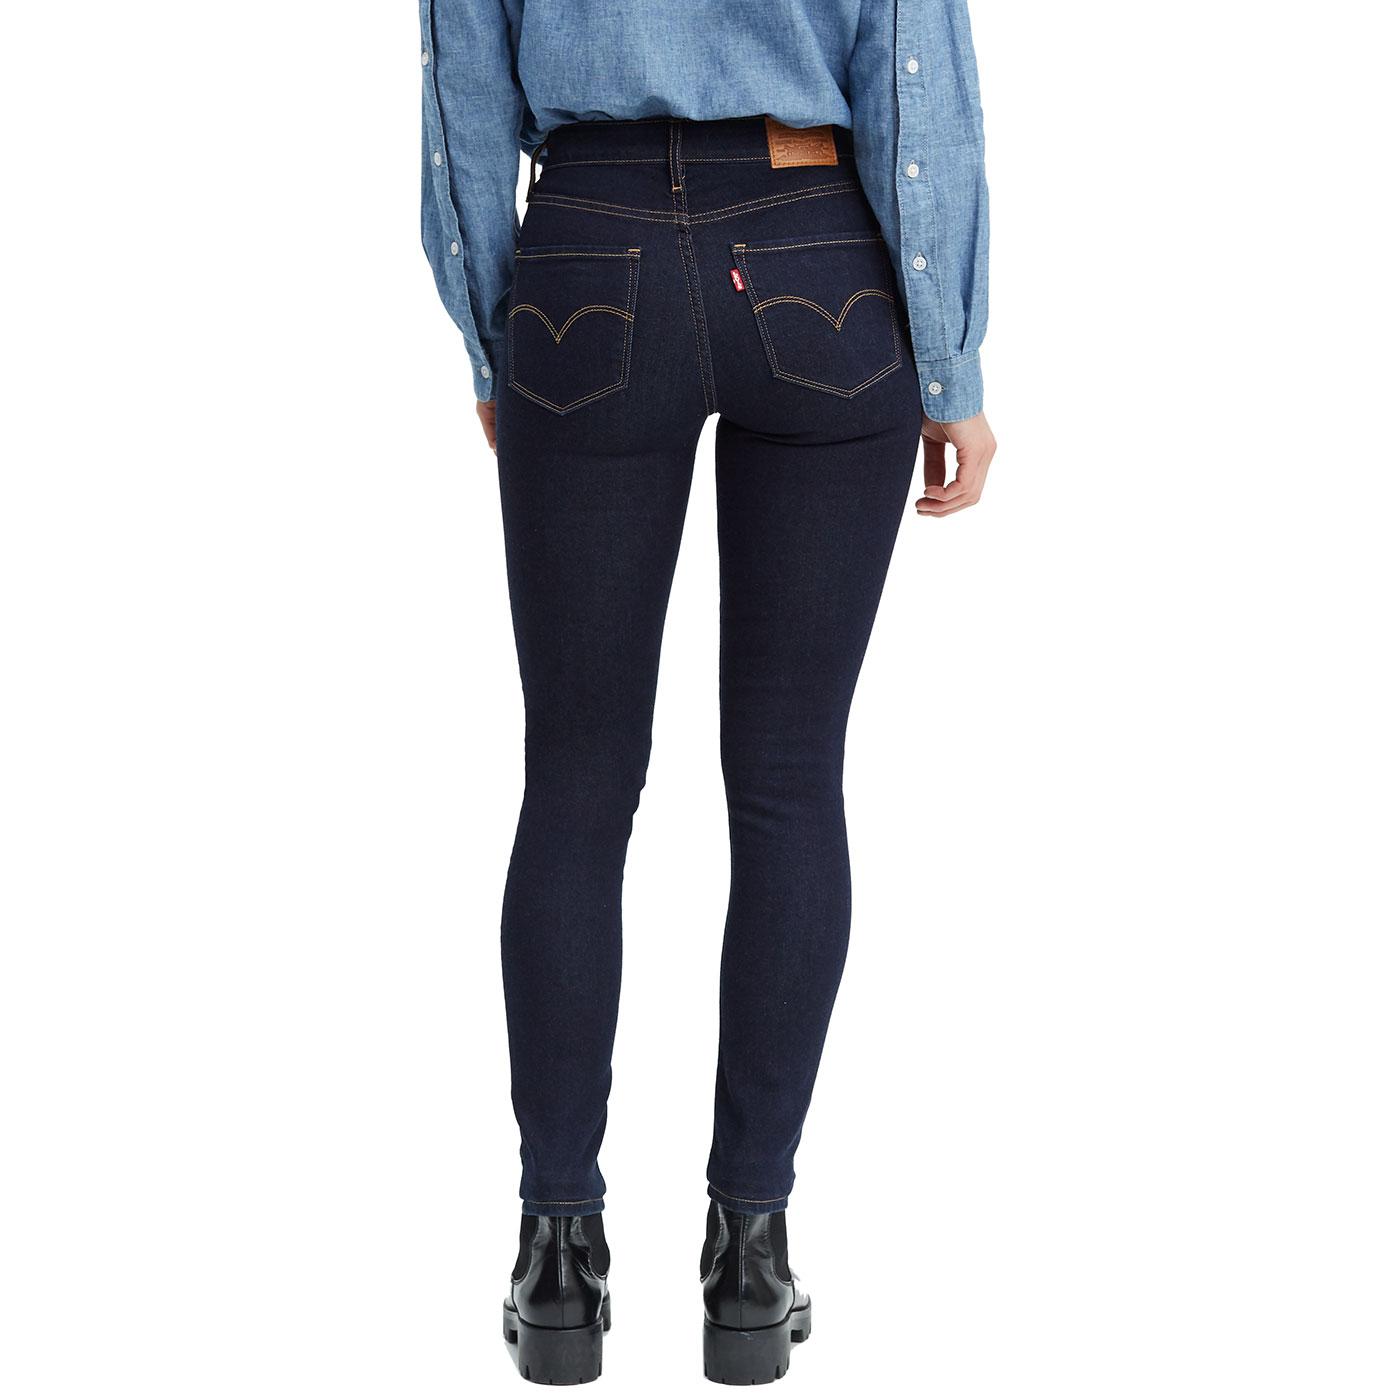 LEVI'S Women's 721 High Waisted Skinny Jeans in To The Nine